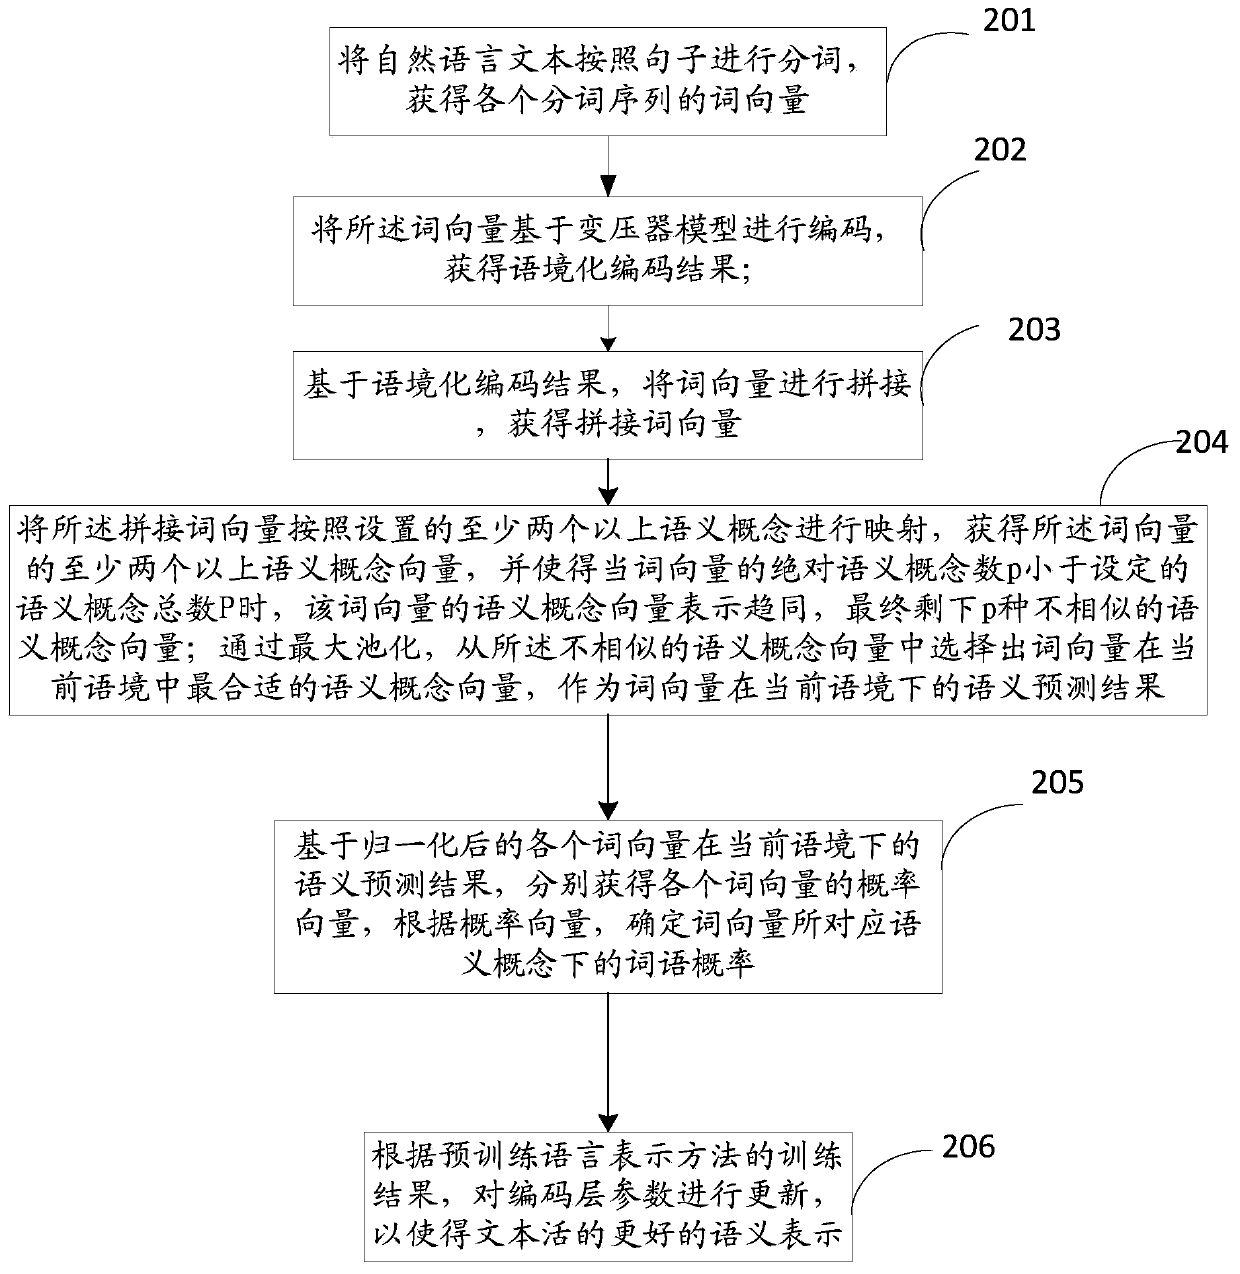 Text coding representation method based on transformer model and multiple reference systems